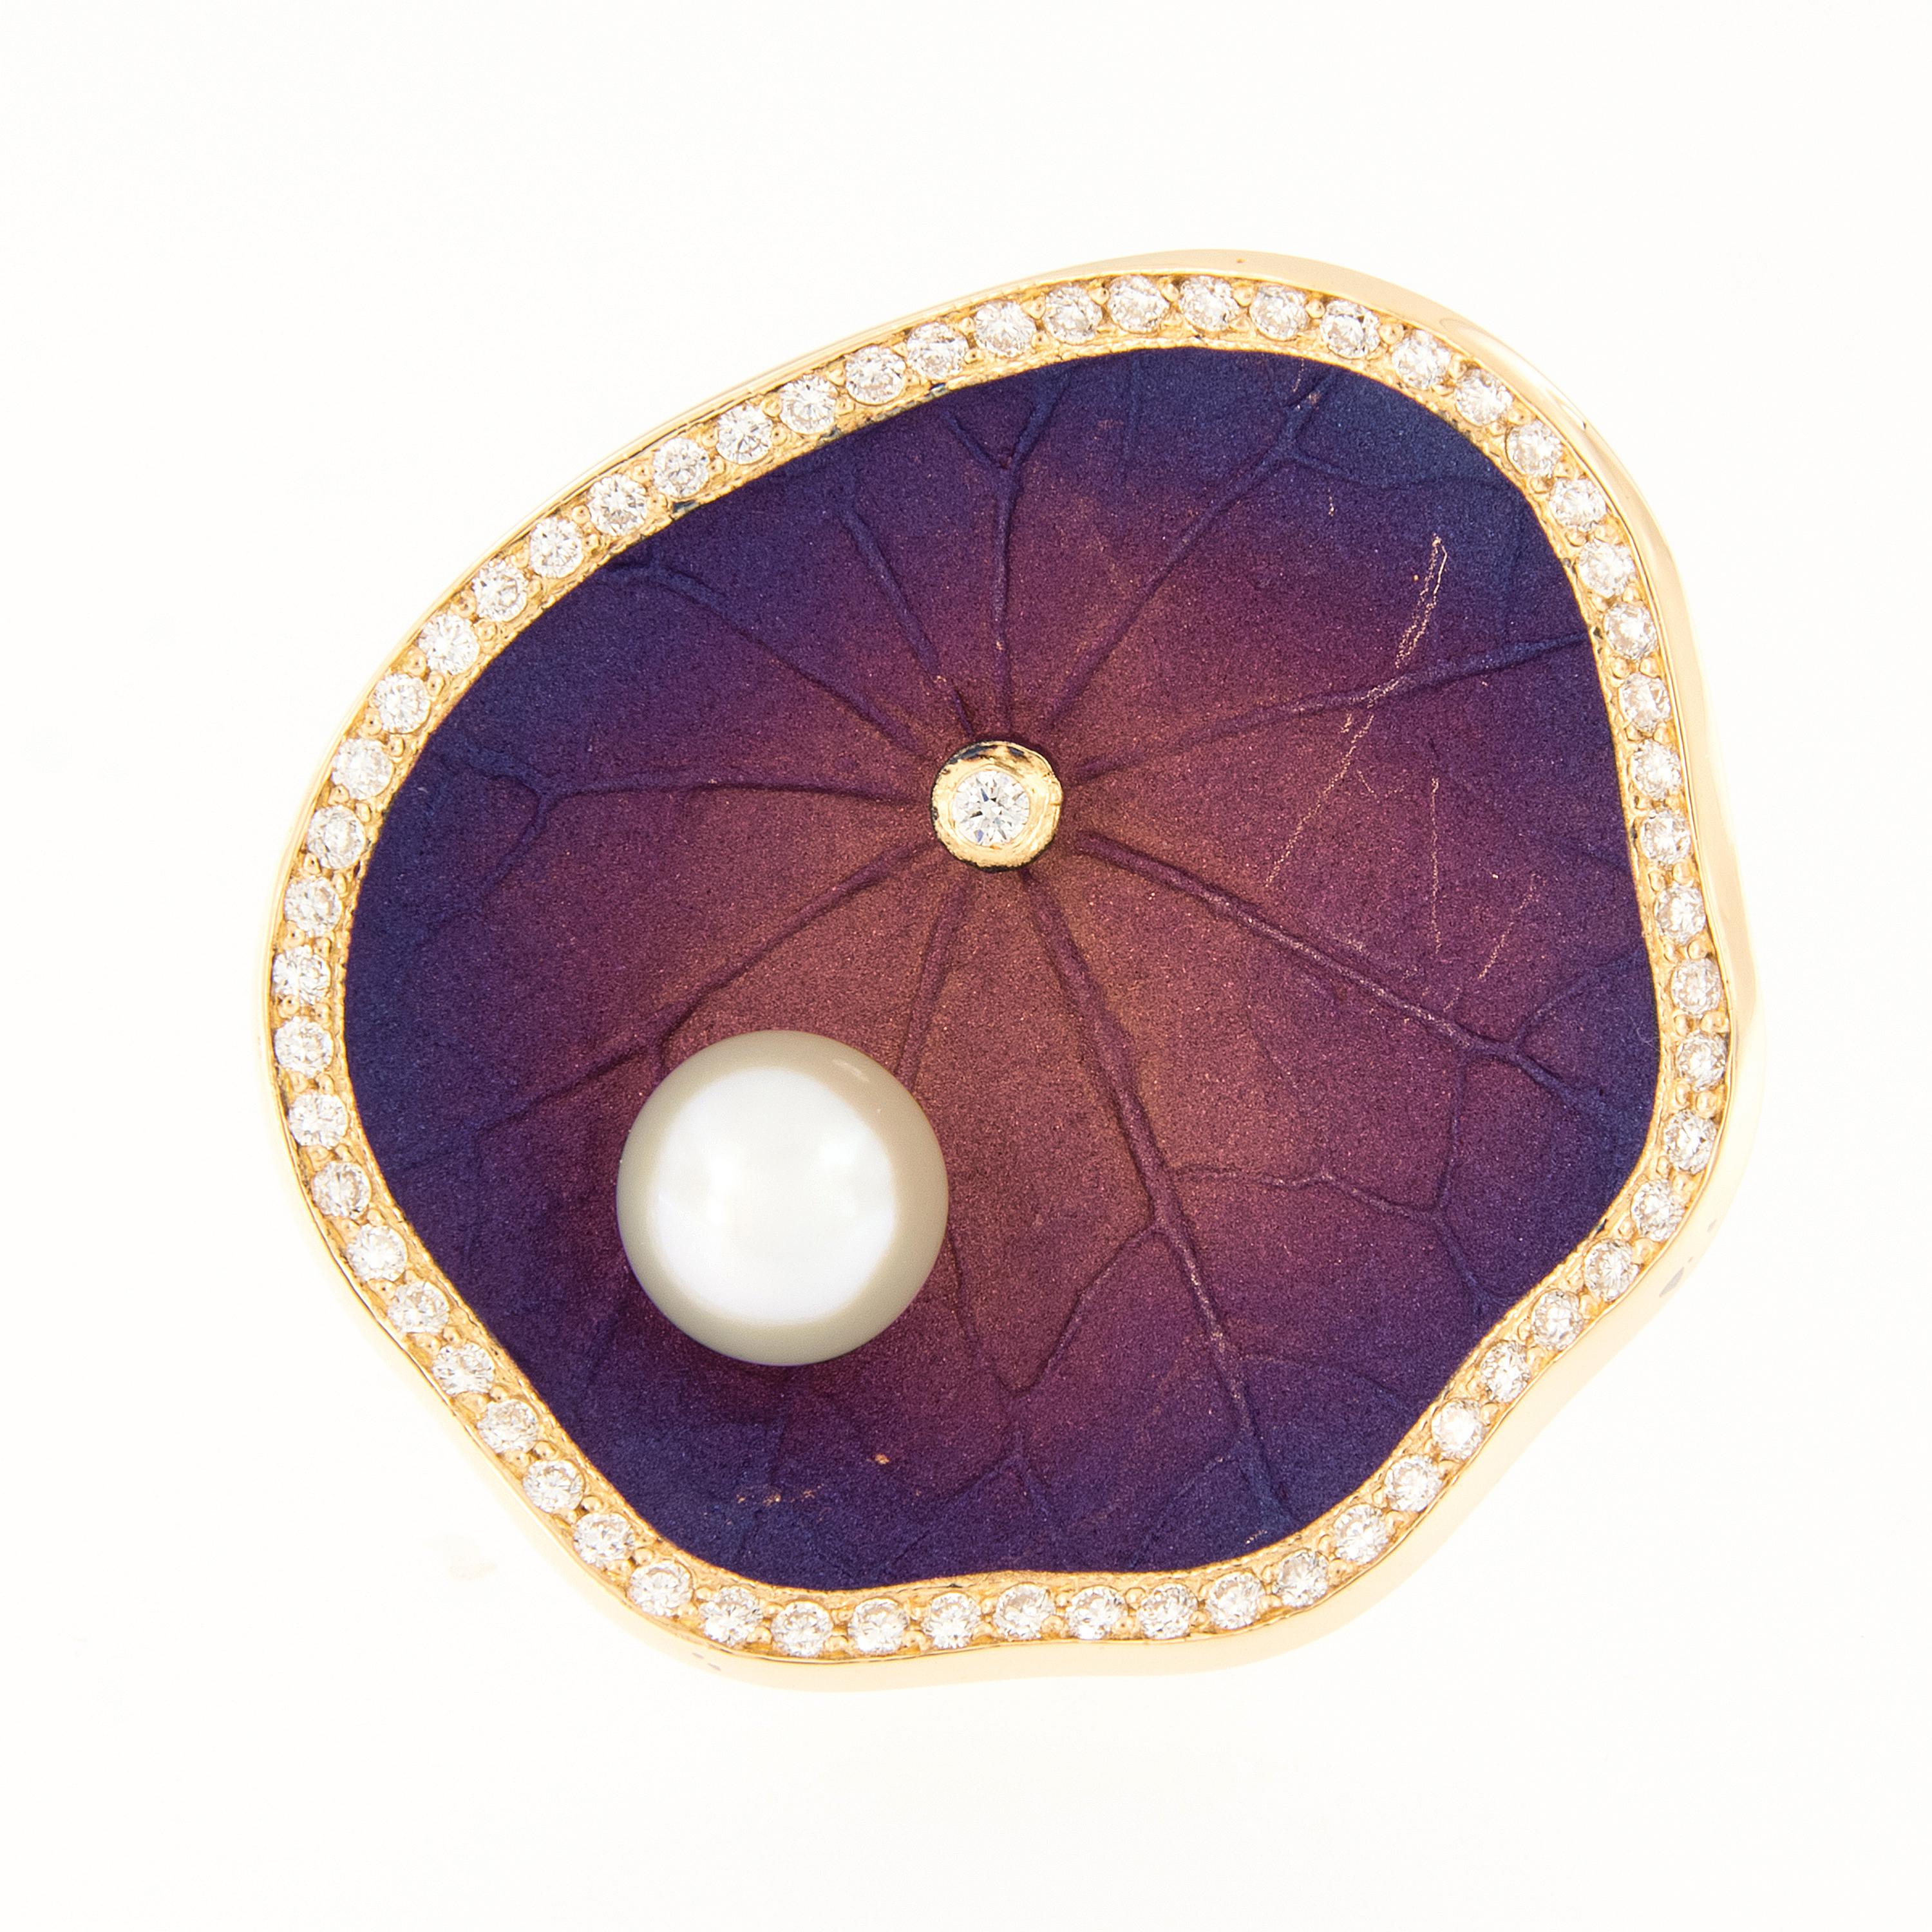 Unique statement ring crafted in 18k yellow gold featuring a stylized lily pad with an anodized purple finish, framed in diamonds, accented with a cultured pearl and a bezel set diamond. Ring size 6. Weighs 13.3 grams.

Diamonds 0.42 cttw
Pearl 6.5